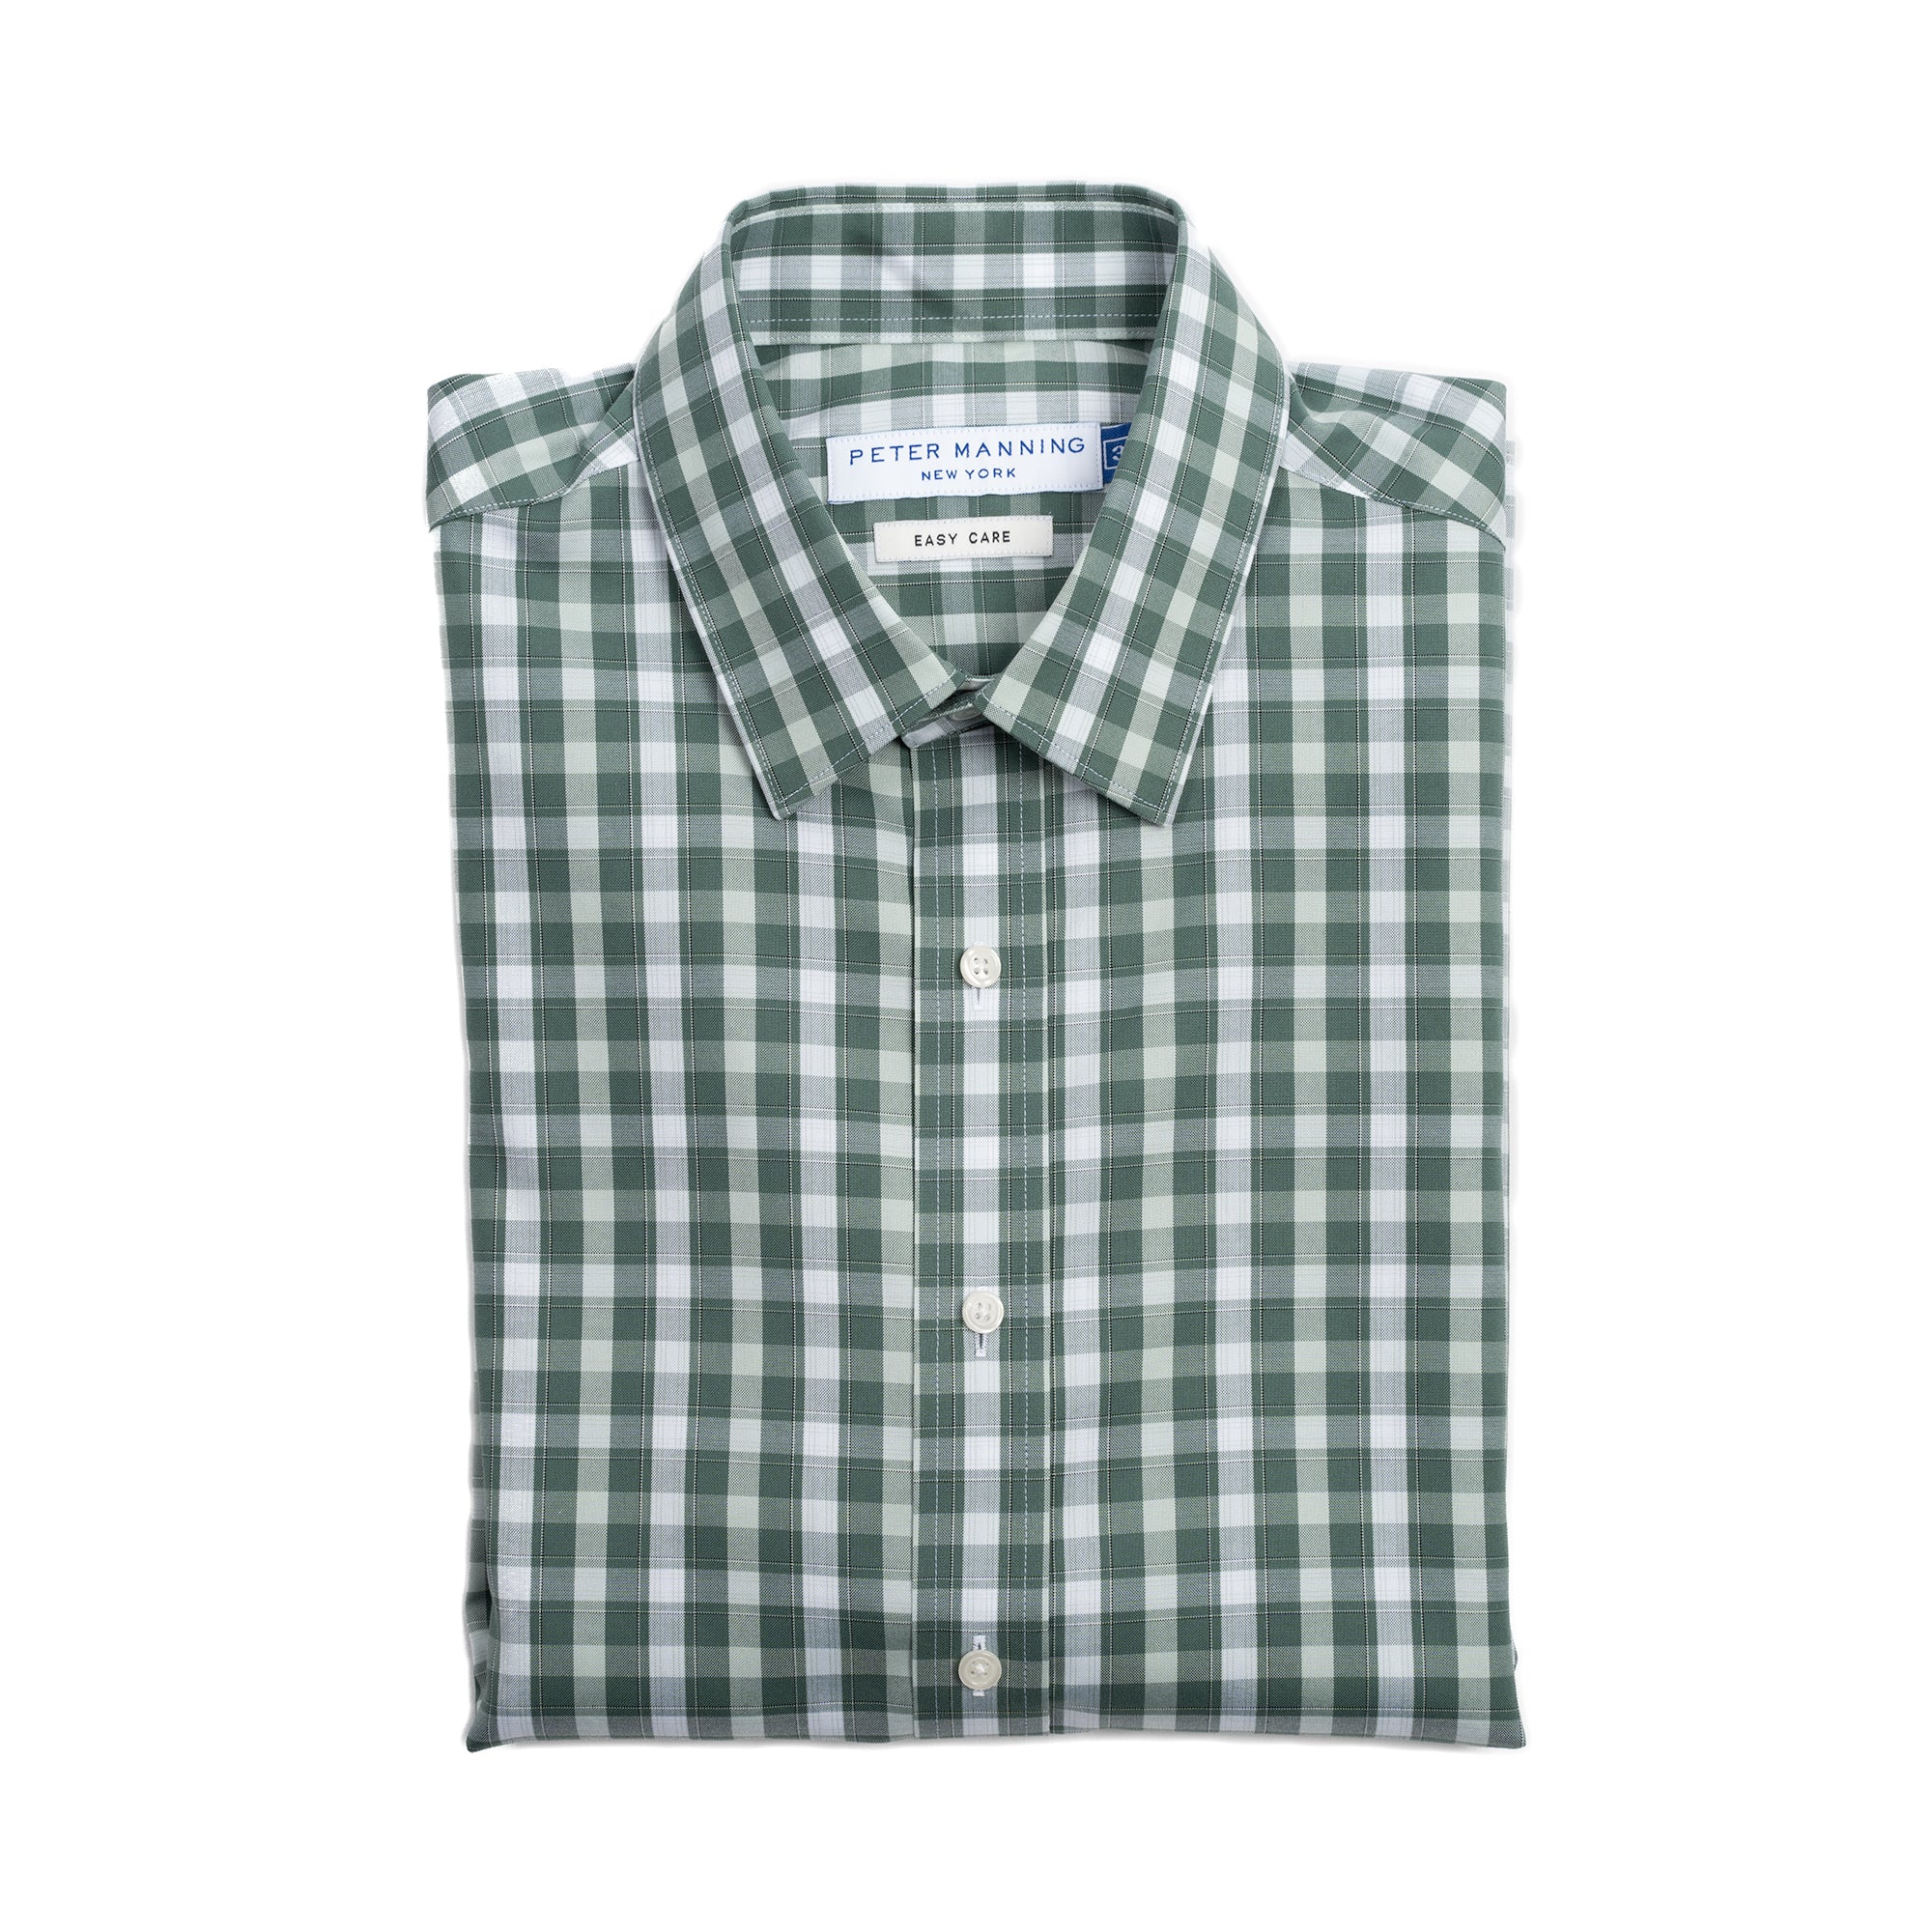 Easy Care Everyday Shirt, Olive Plaid | Peter Manning NYC